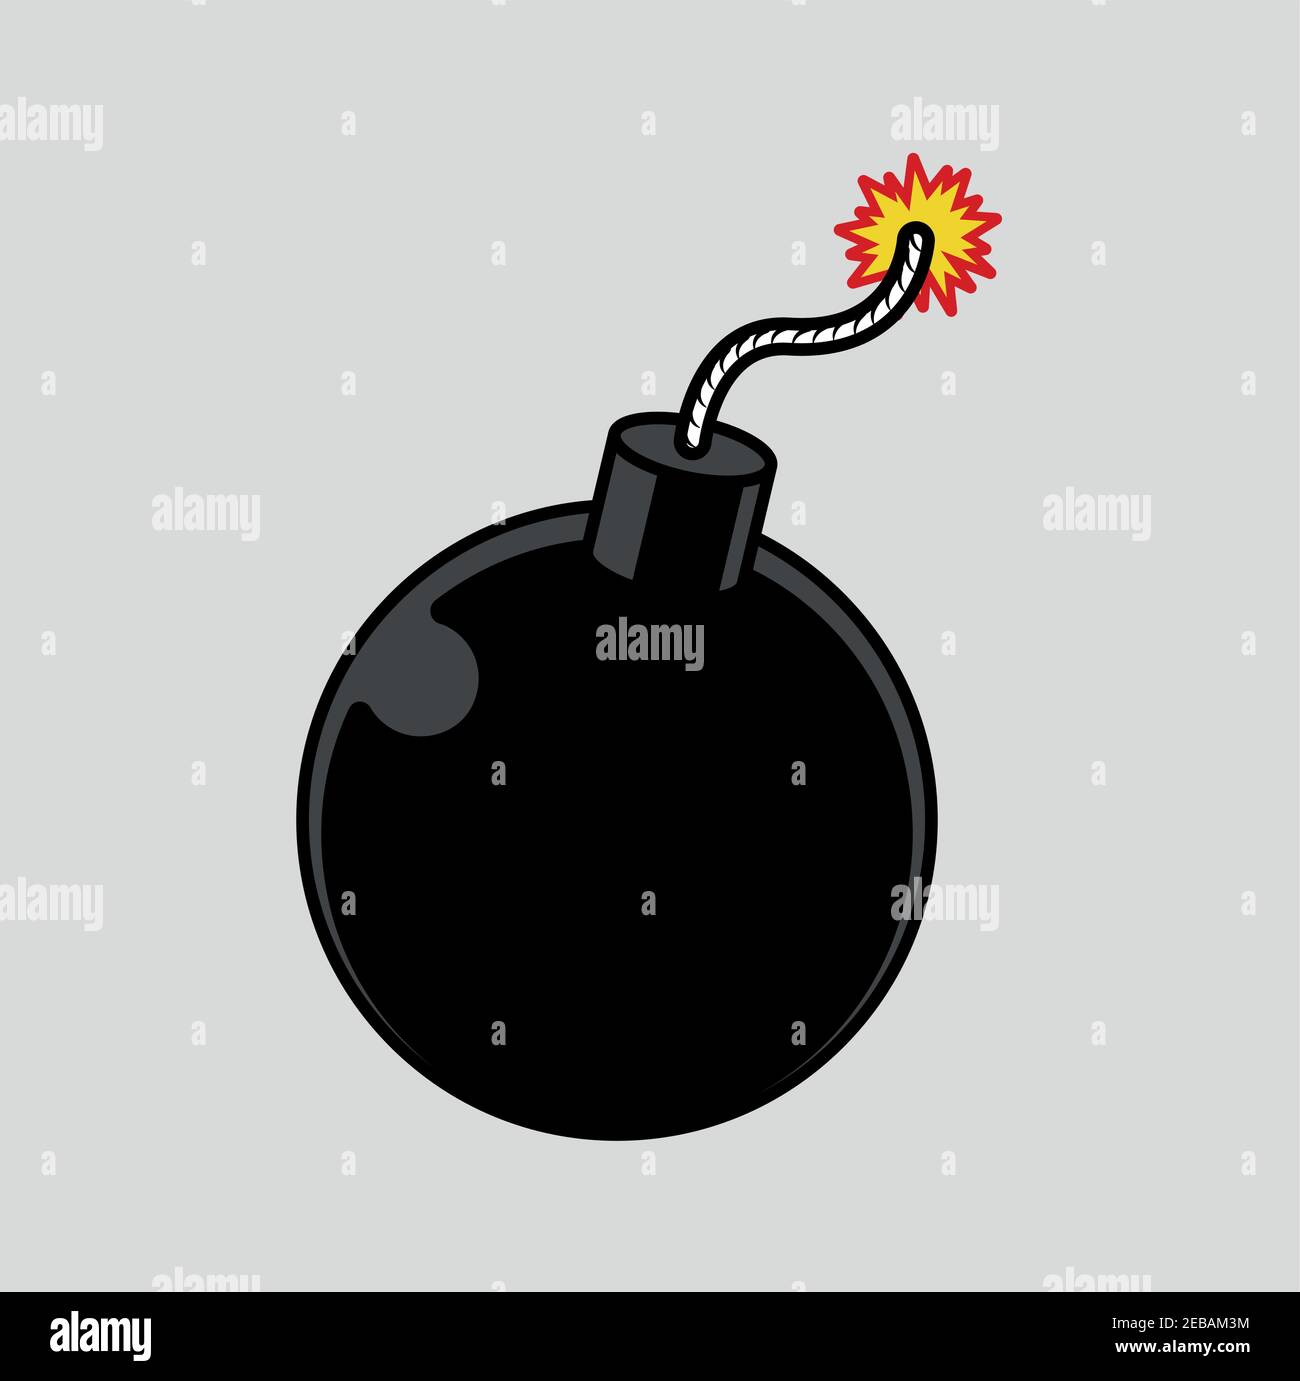 Bomb With Burning Wick Vector Icon Illustration Isolated. Stock Vector